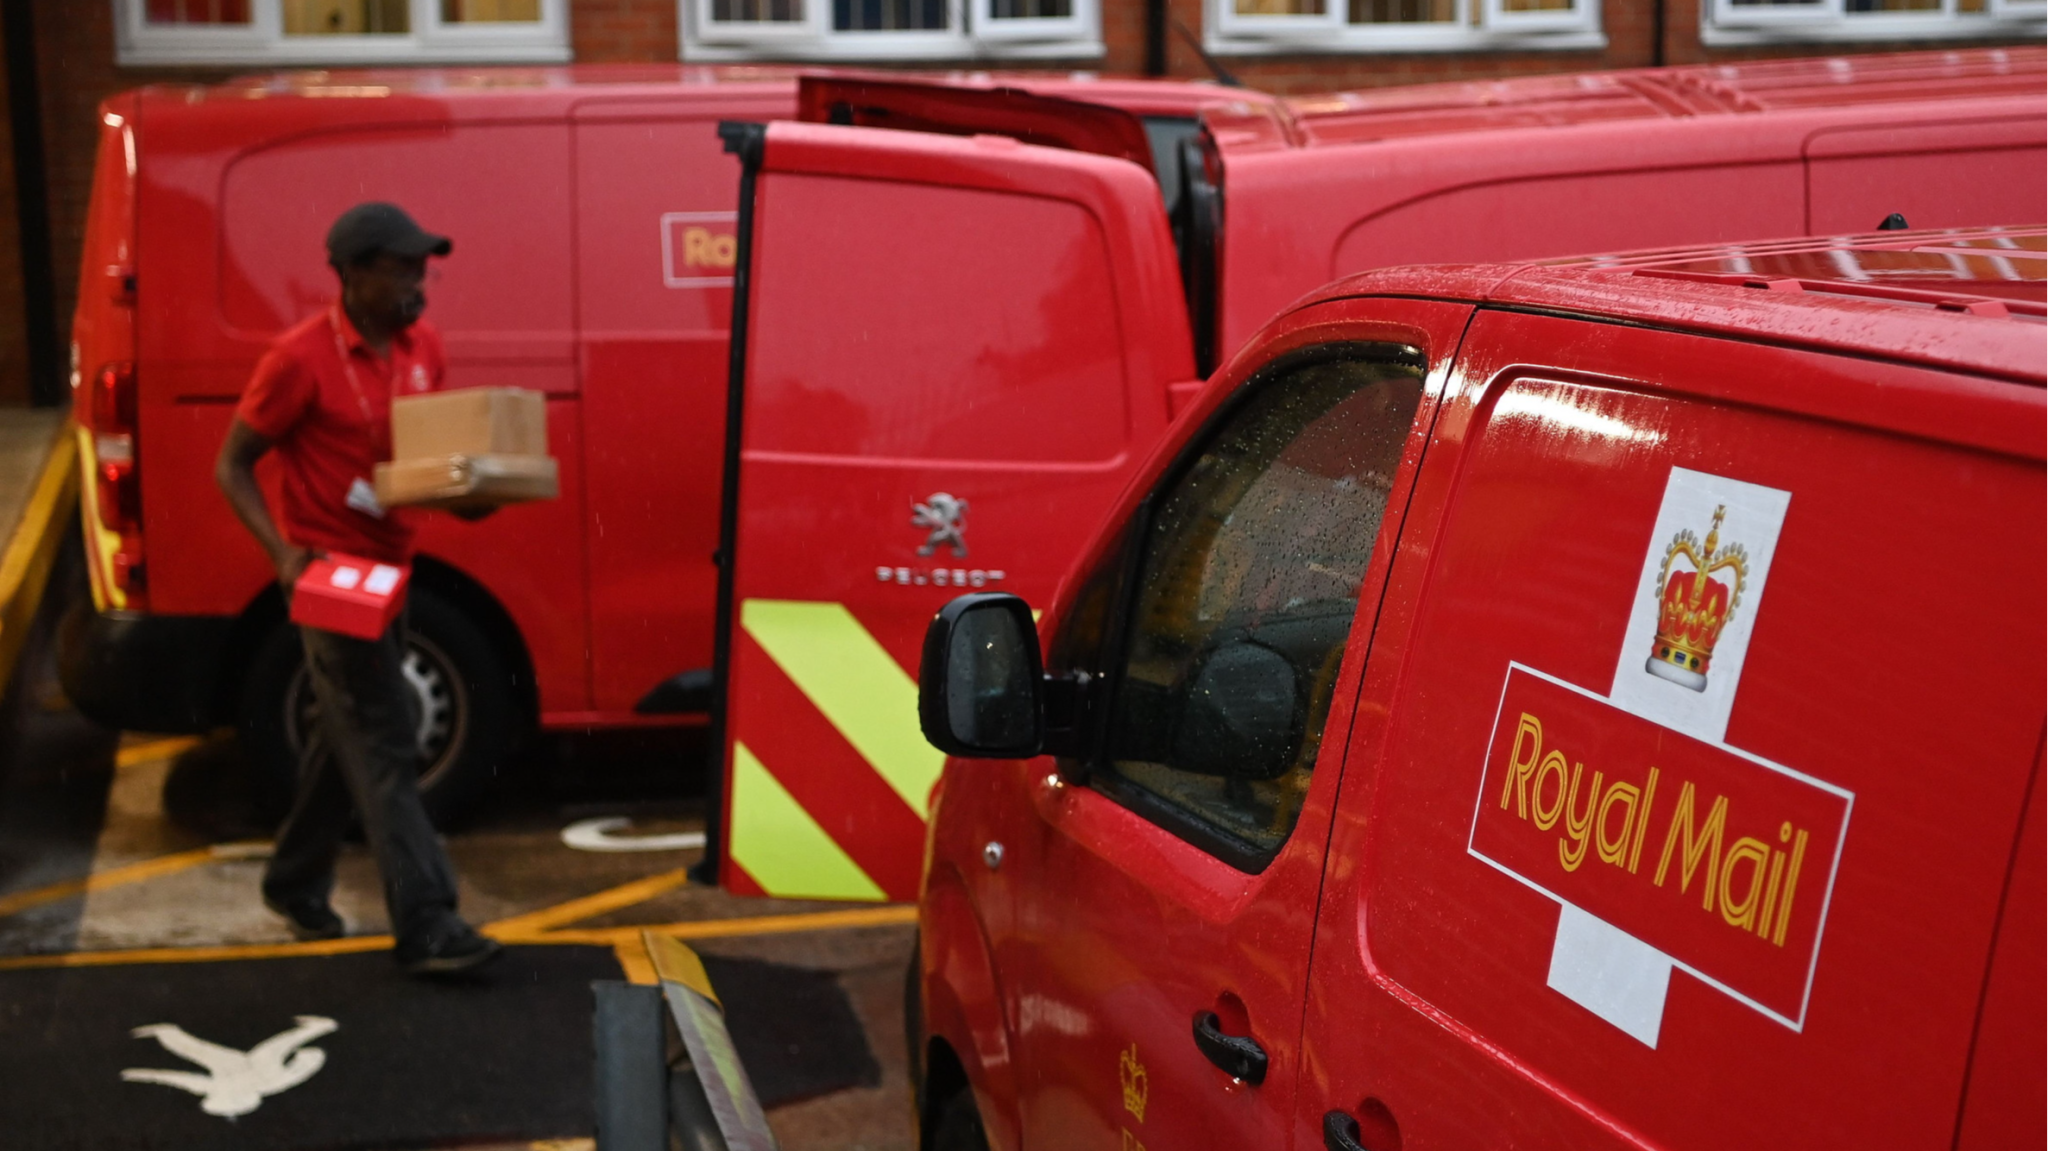 Live news updates: UK postal workers to strike for 19 days in next two months